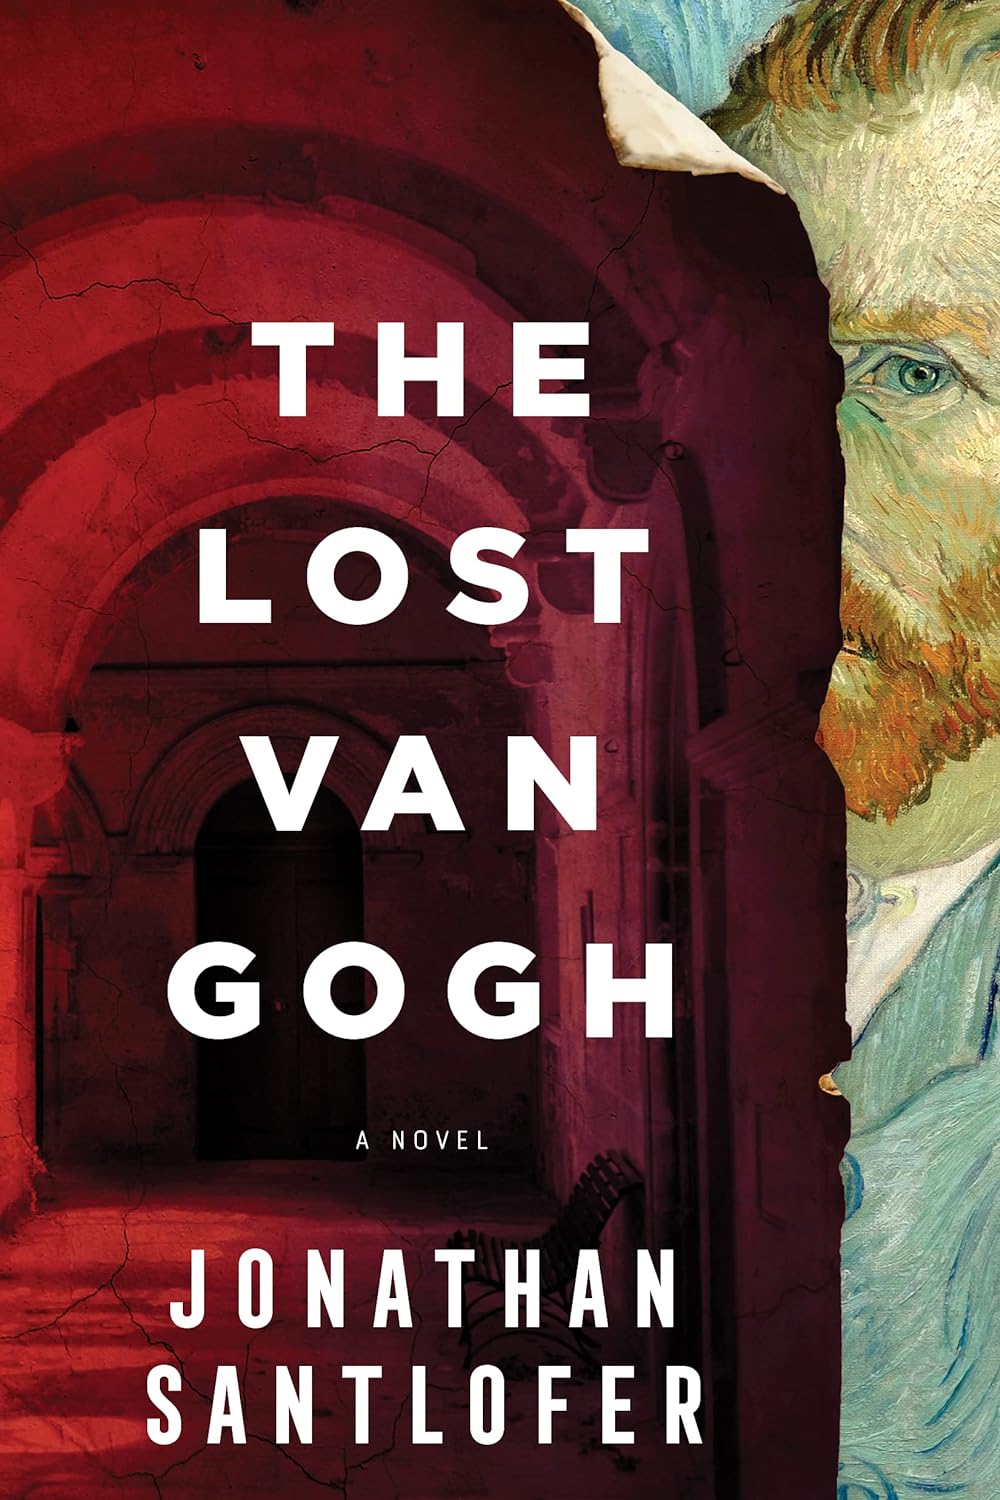 Image for "The Lost Van Gogh"